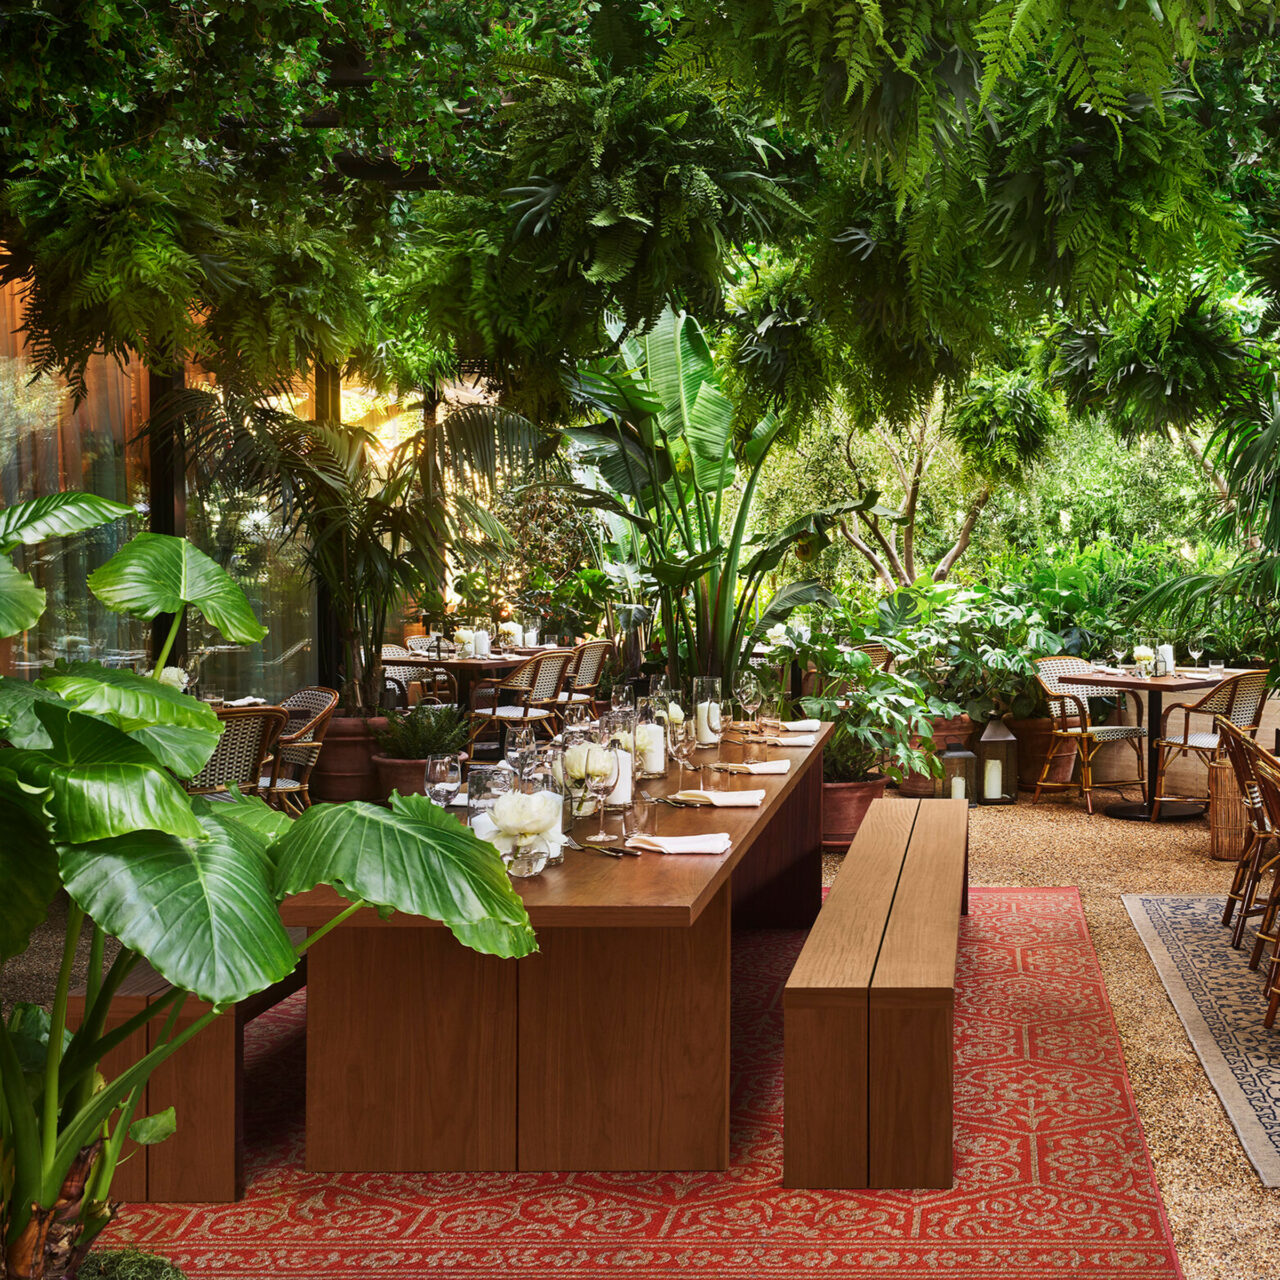 A verdant outdoor dining area by SENTIENT with lush greenery, featuring custom outdoor furniture, with wooden tables and benches on a red patterned rug, offering an inviting, natural dining experience.